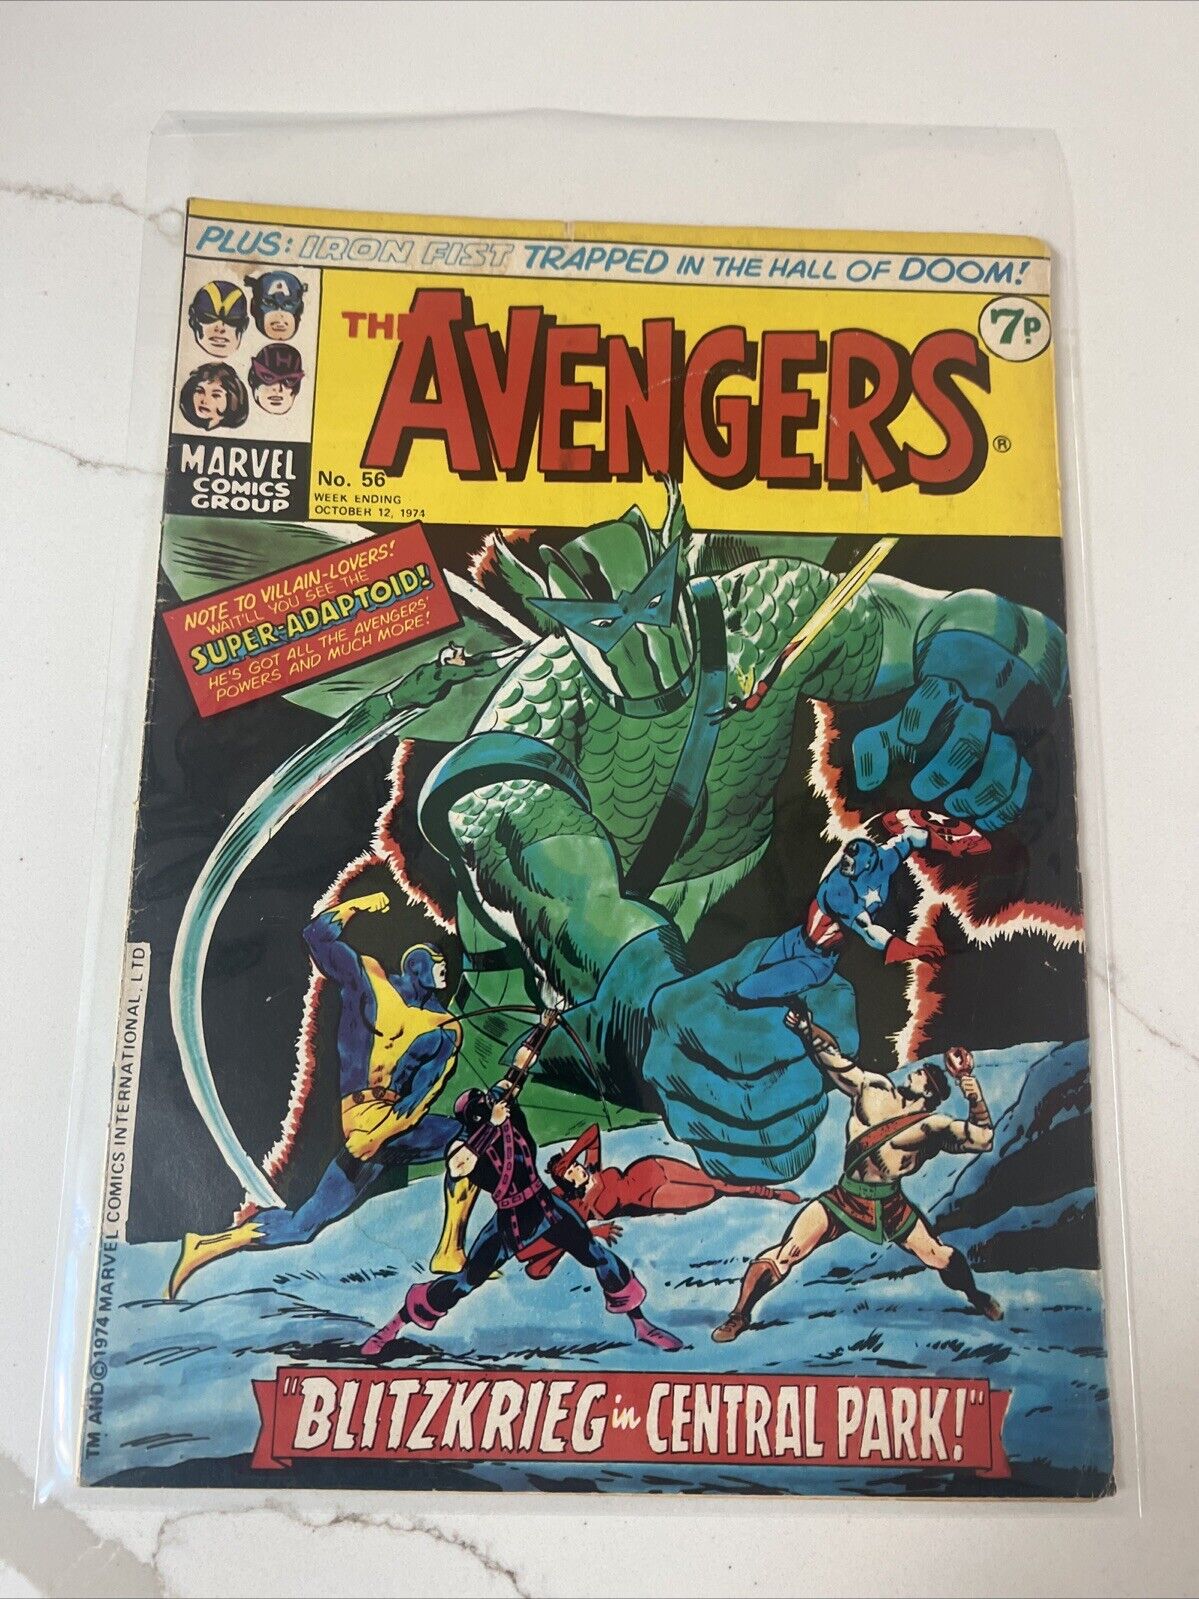 The Avengers #56-1974 Britain’s Finest Marvel Comics Weekly Group UK